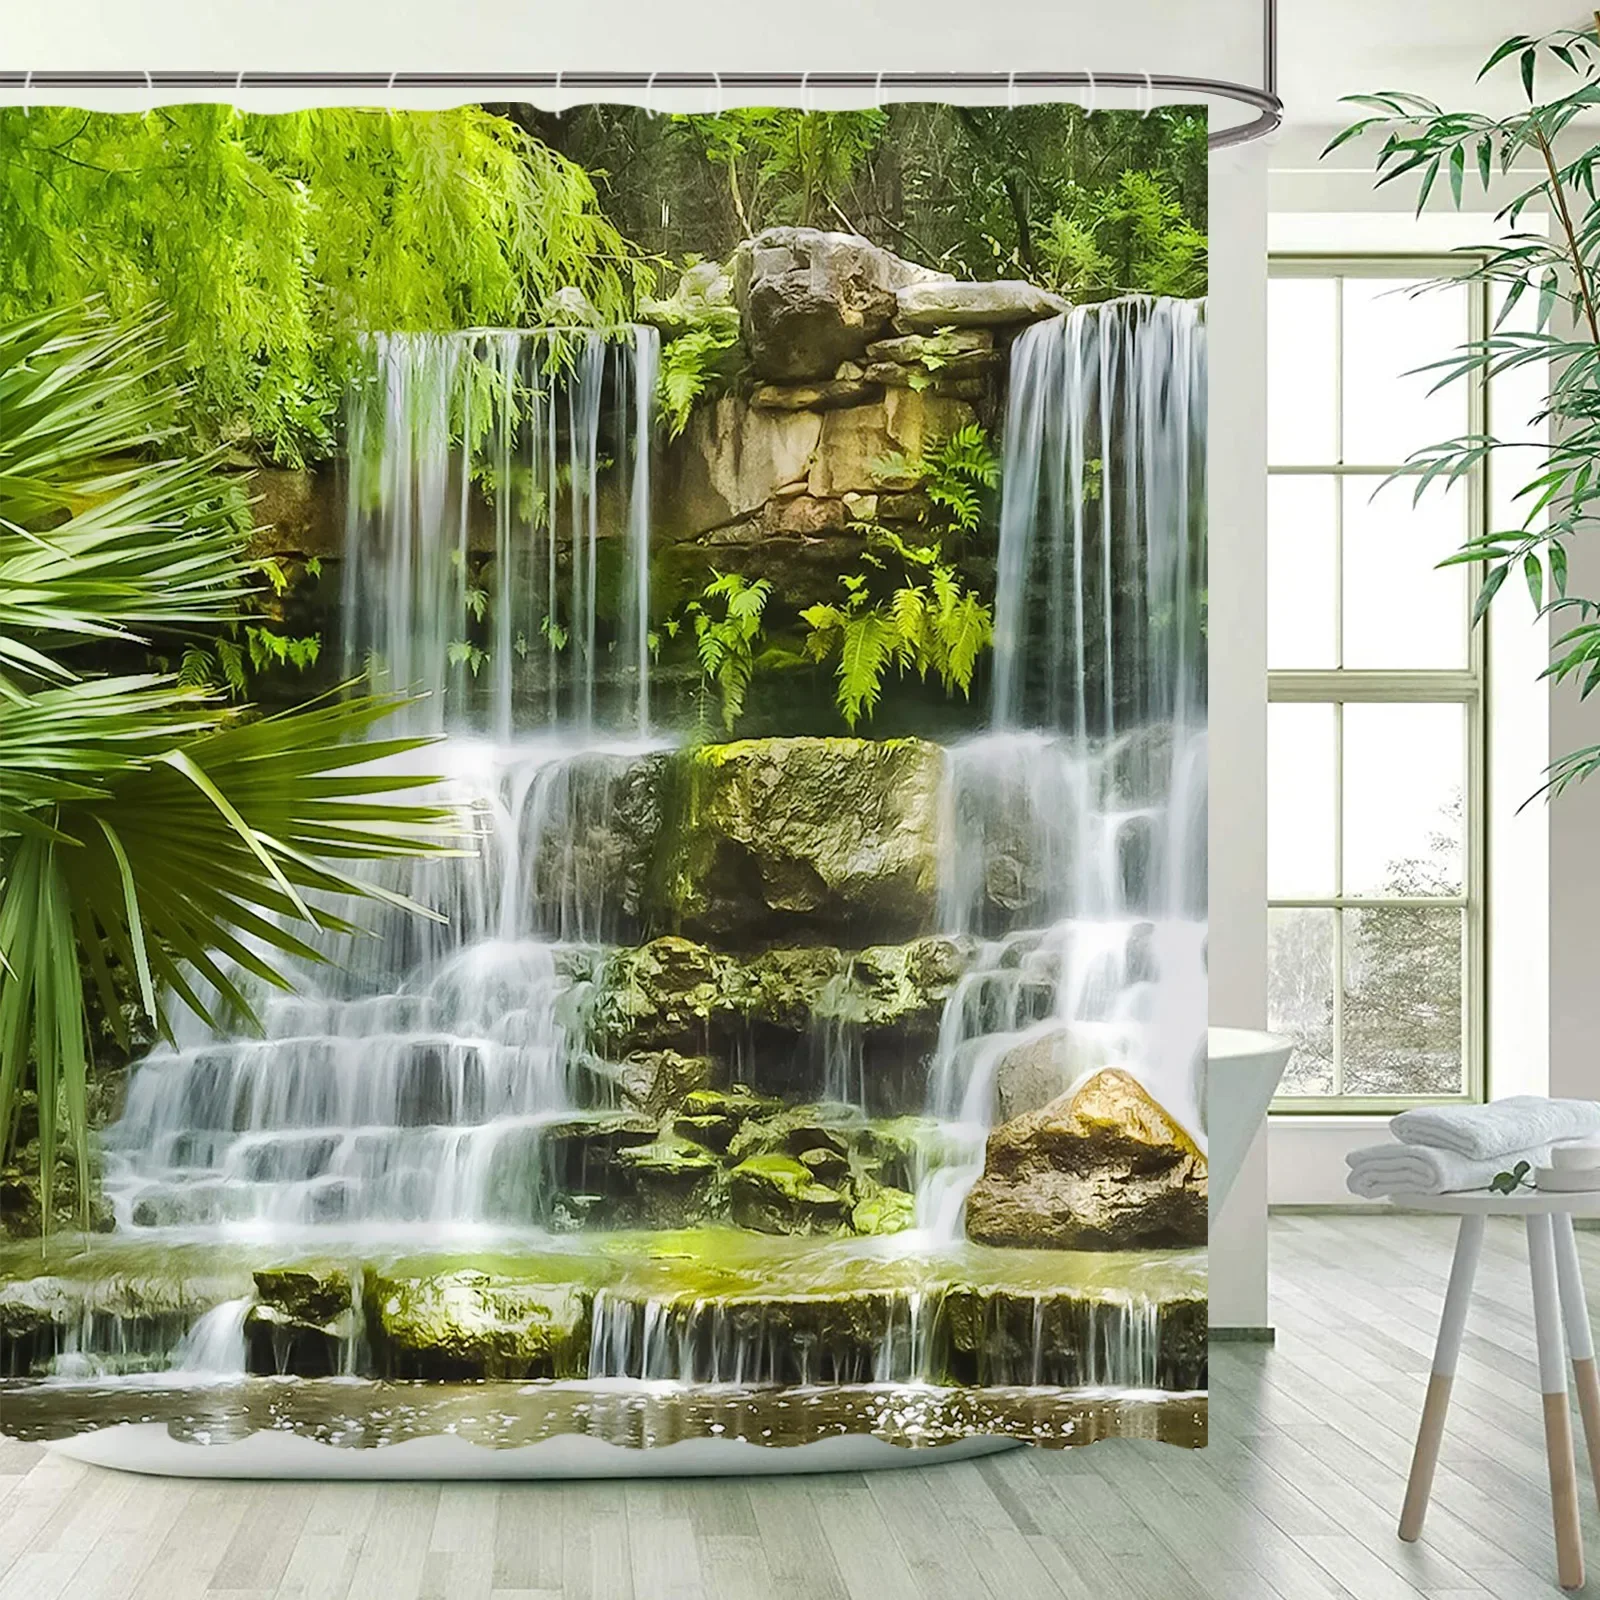 

Garden Waterfall Shower Curtains Tropical Plant Spring Nature Landscape Home Wall Hanging Fabric Bathroom Decor Bath Curtain Set